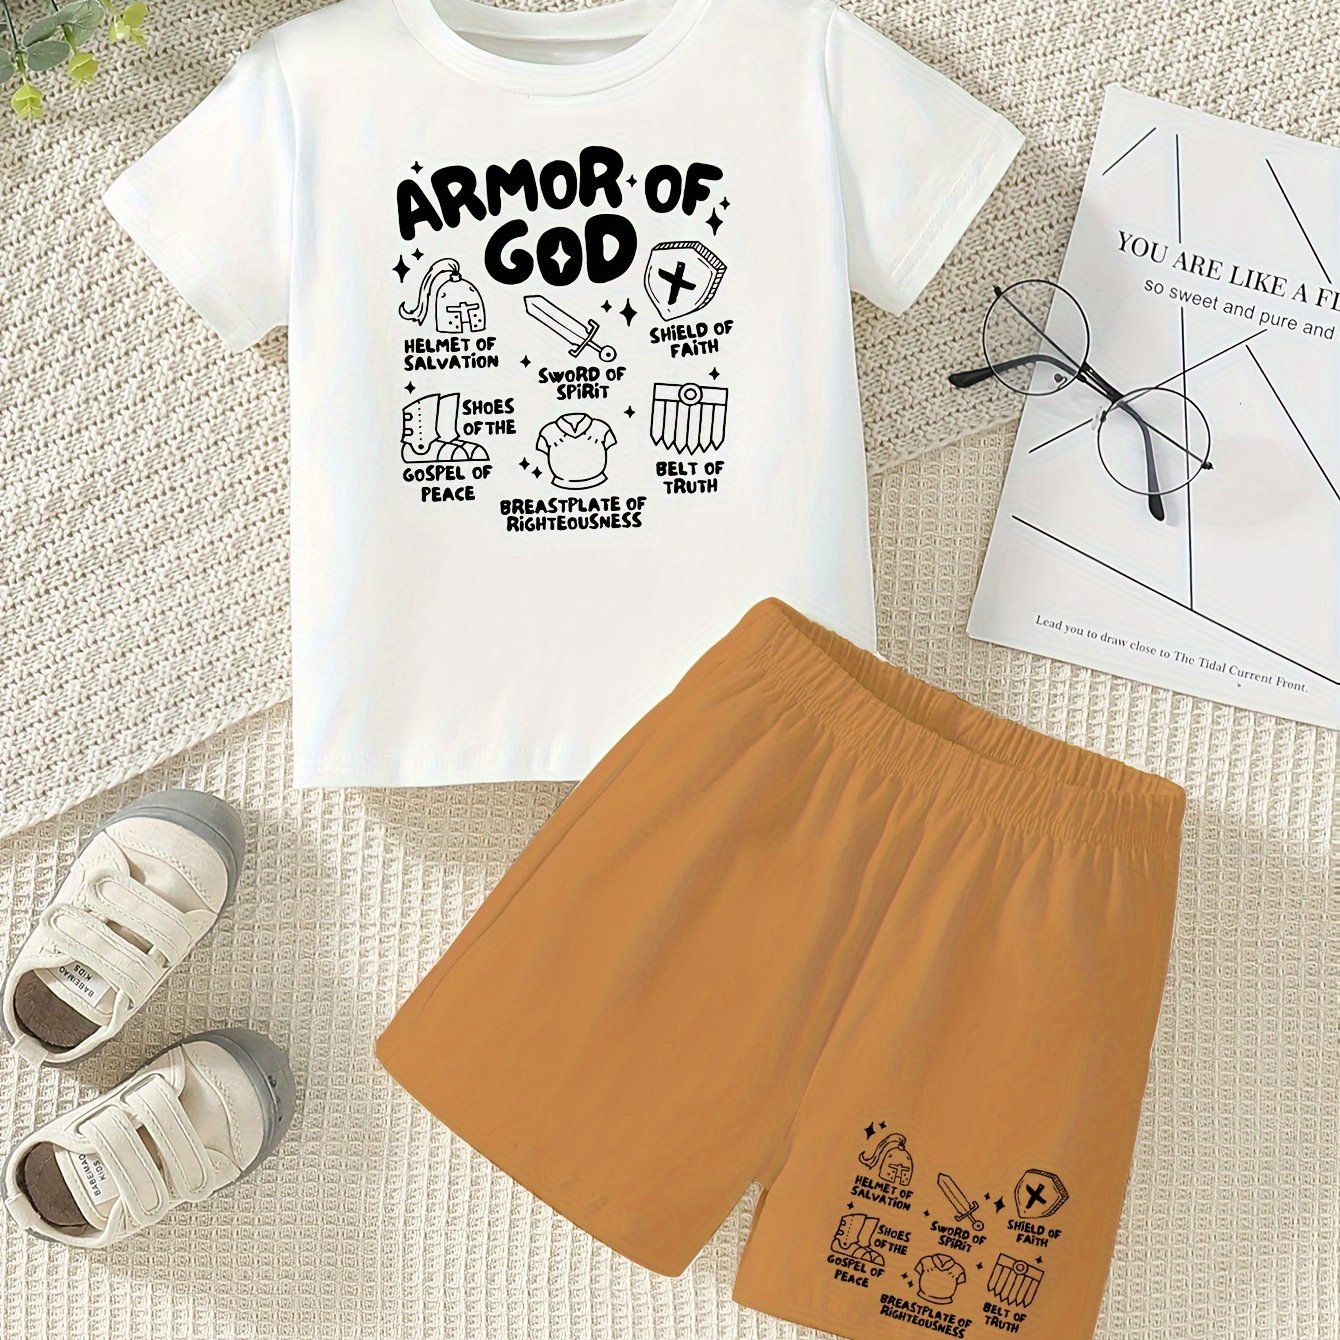 Armor Of God Toddler Christian Casual Outfit claimedbygoddesigns